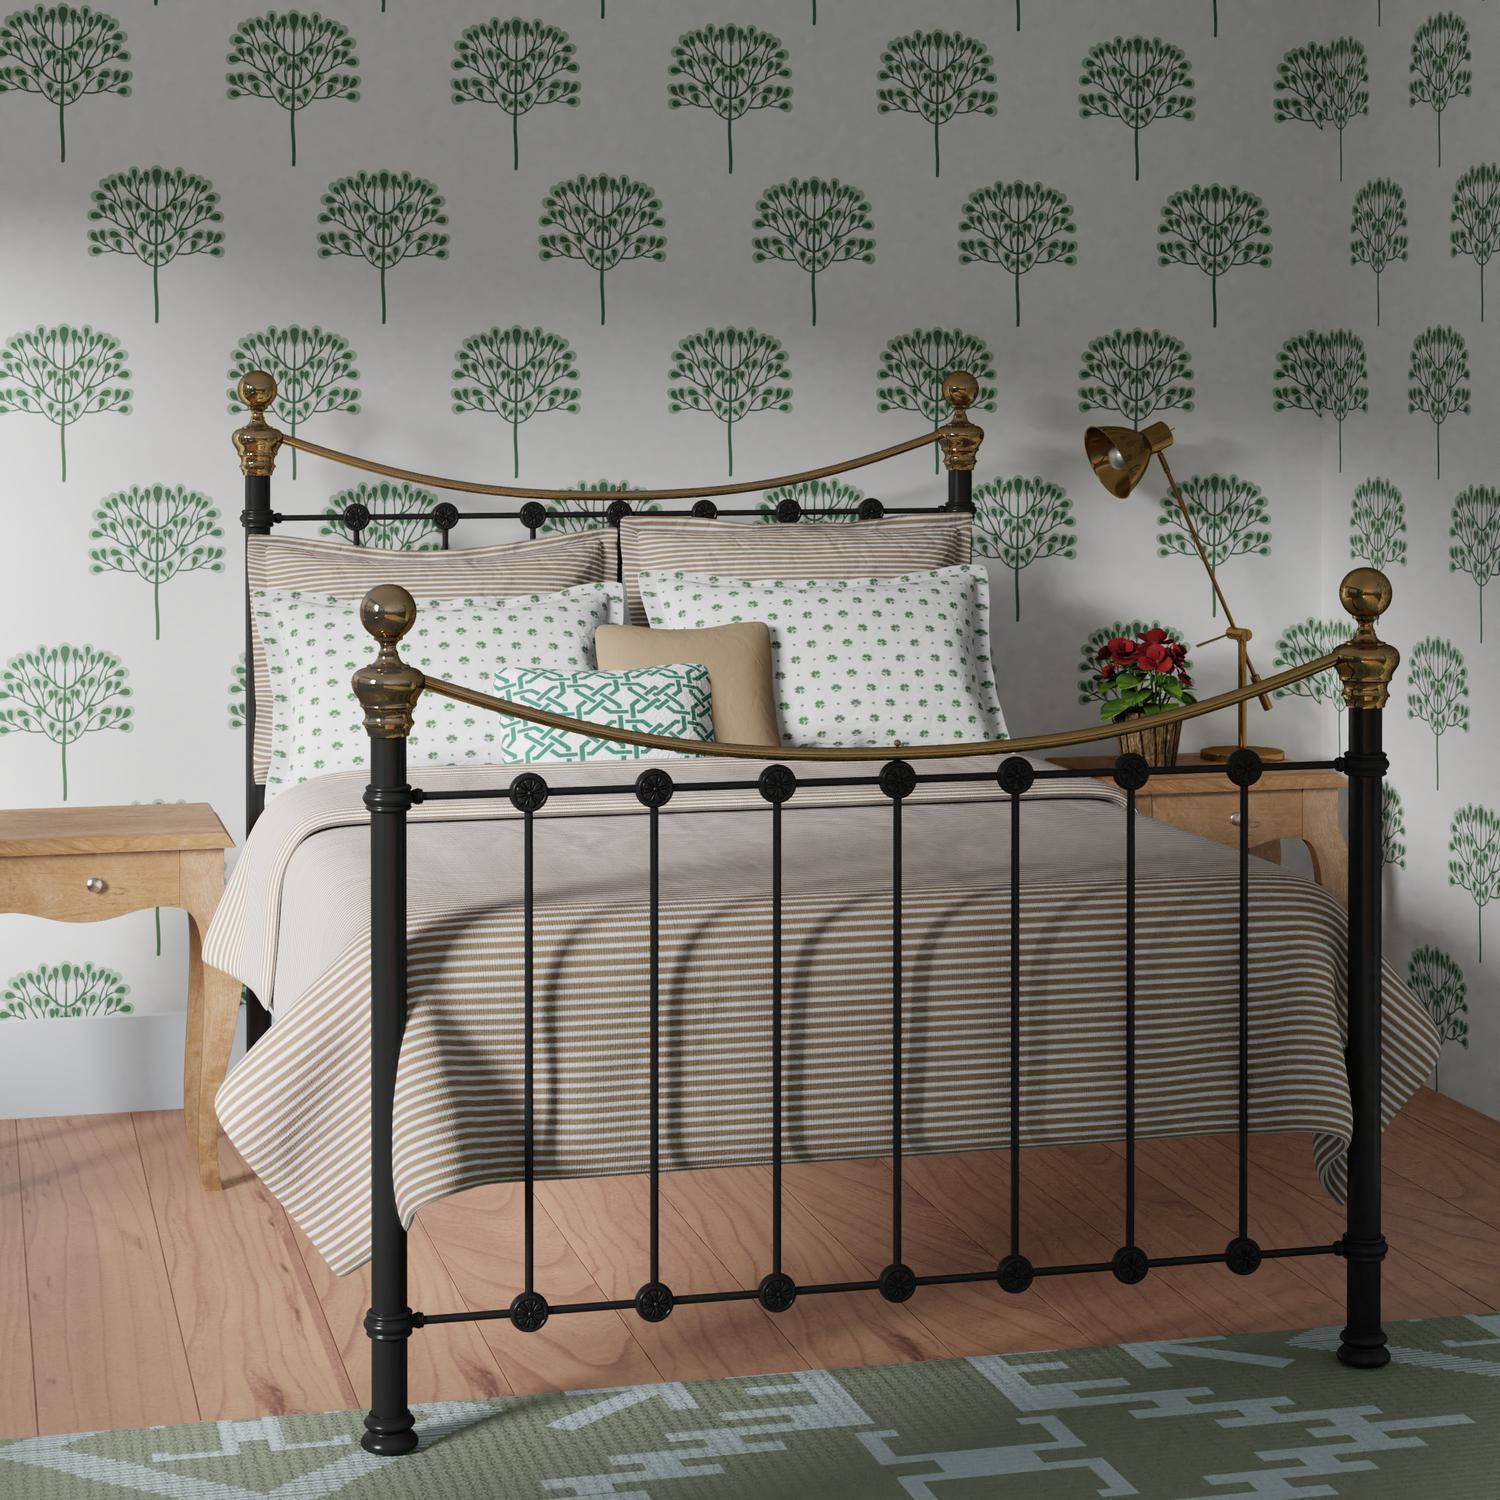 Selkirk iron bed - Image green